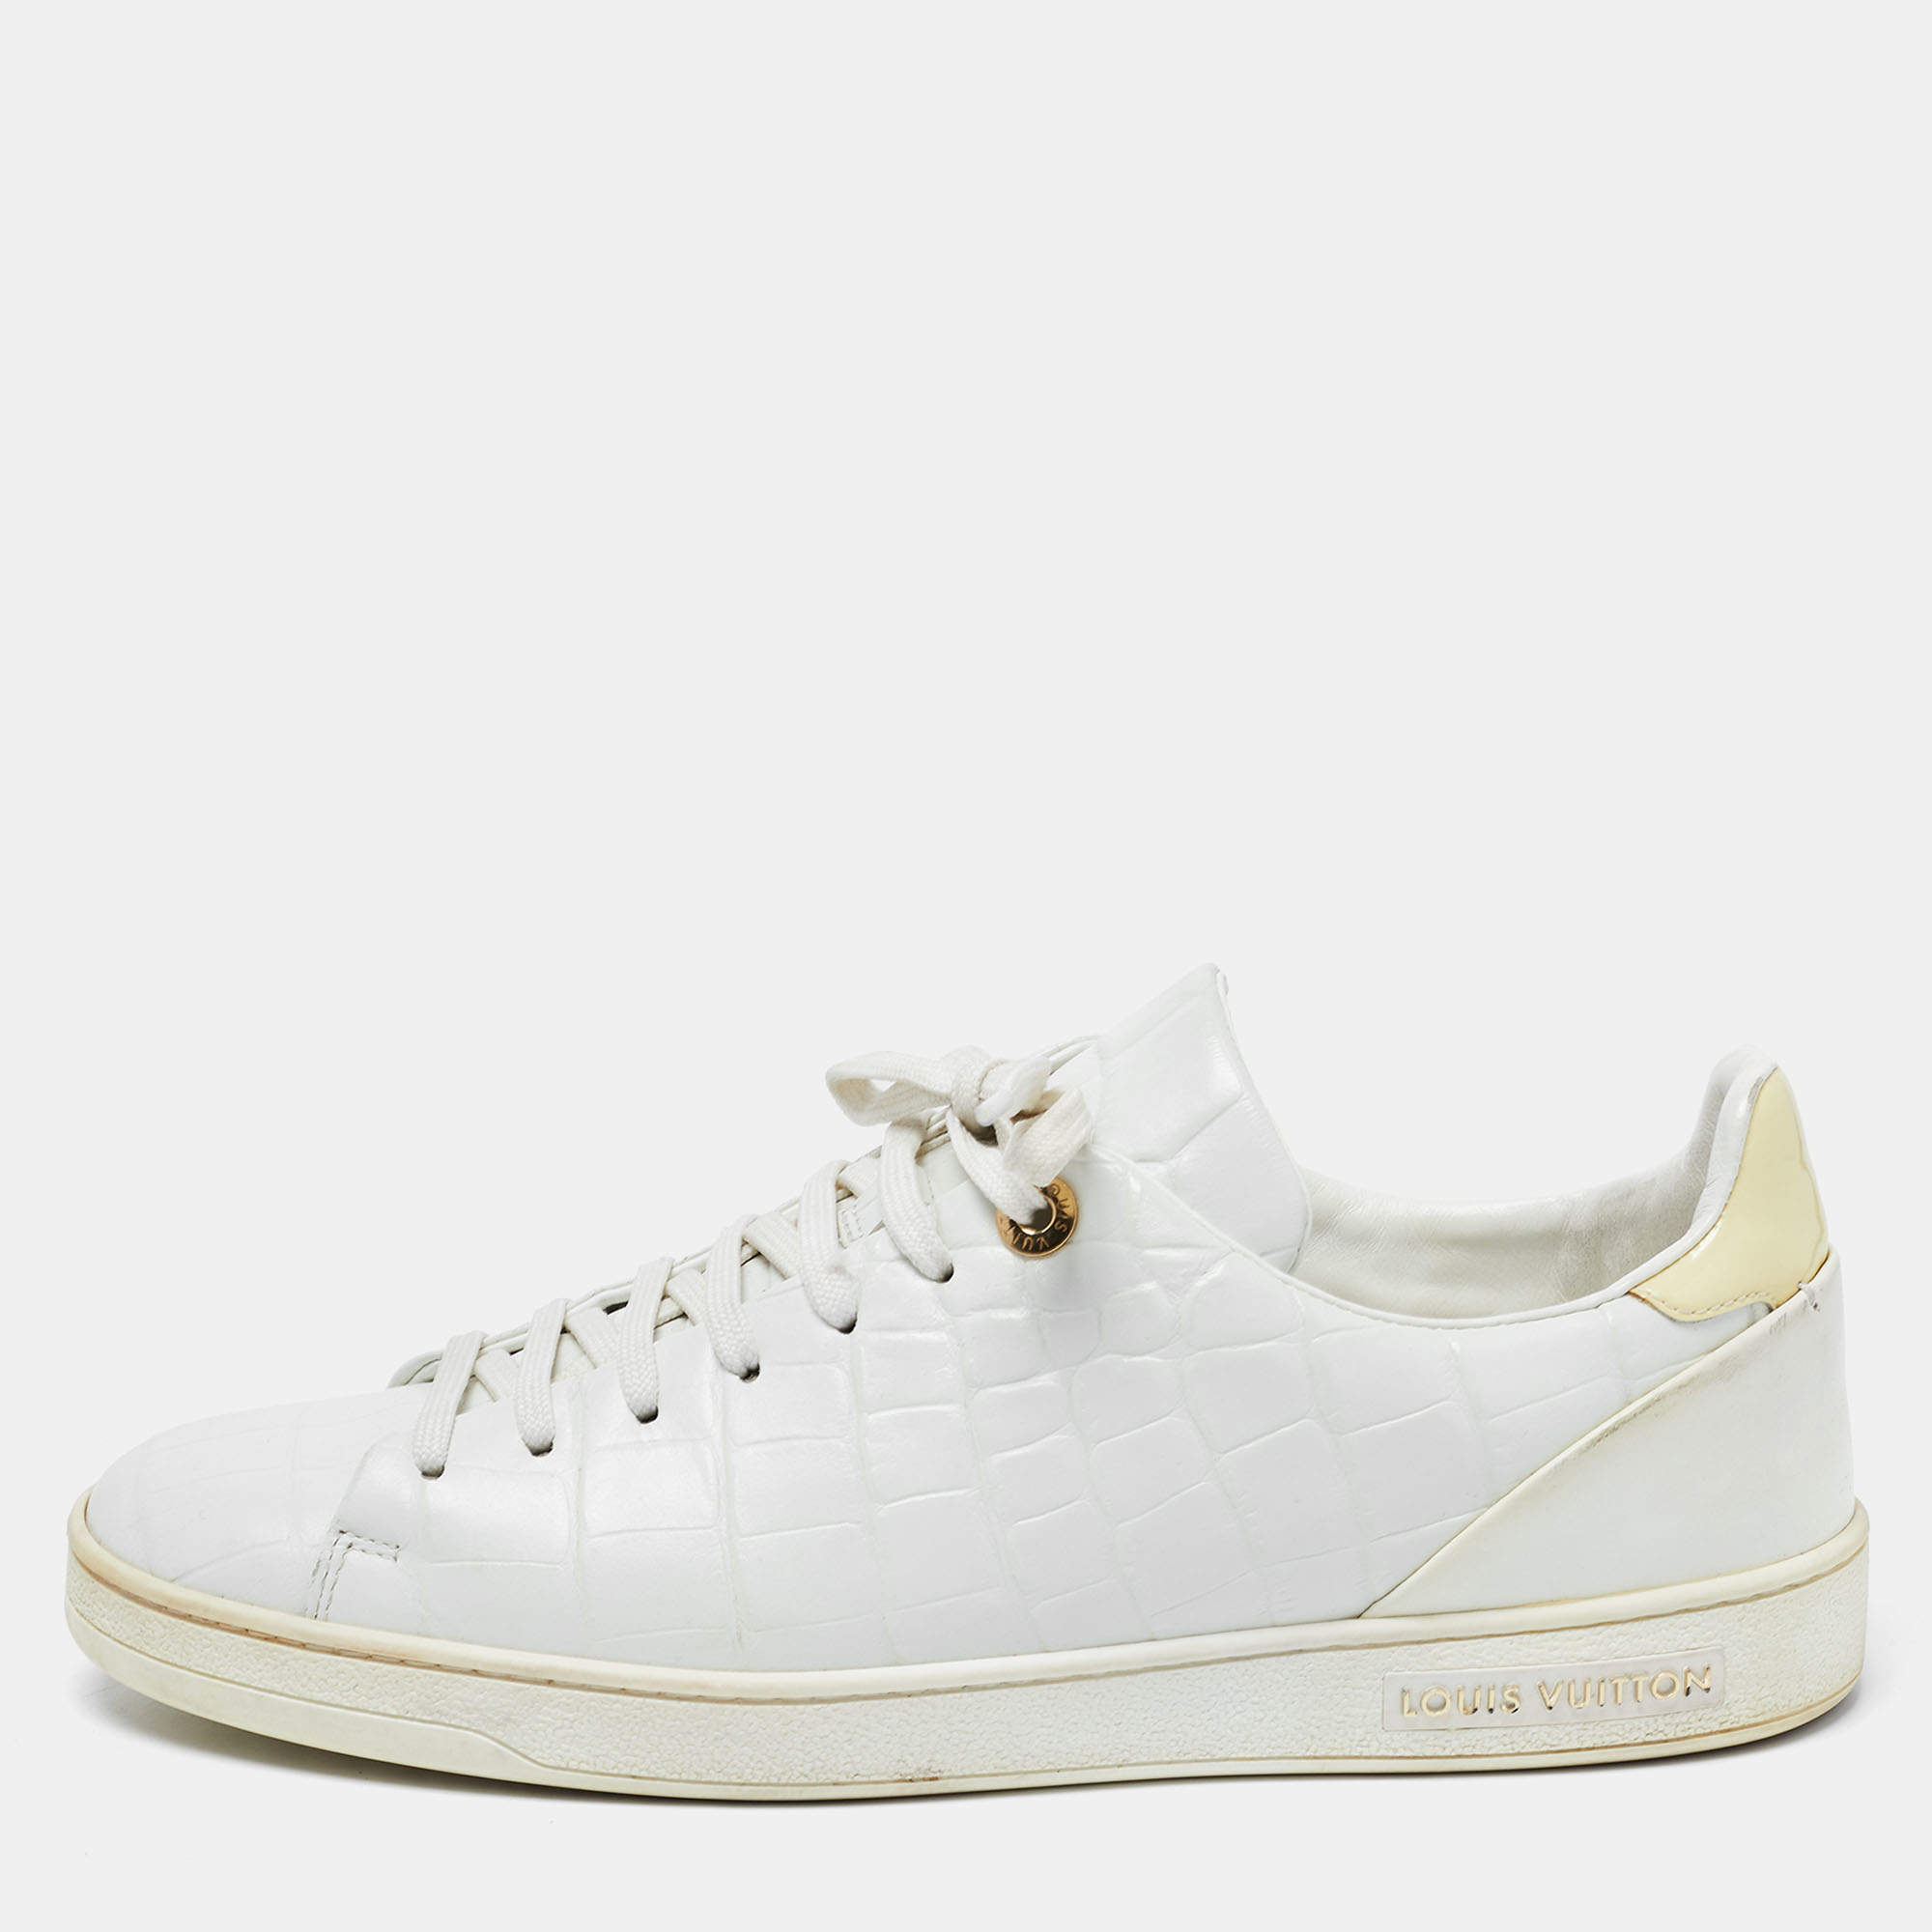 Louis Vuitton White Croc Embossed Leather Frontrow Sneakers Size 38.5 Louis  Vuitton